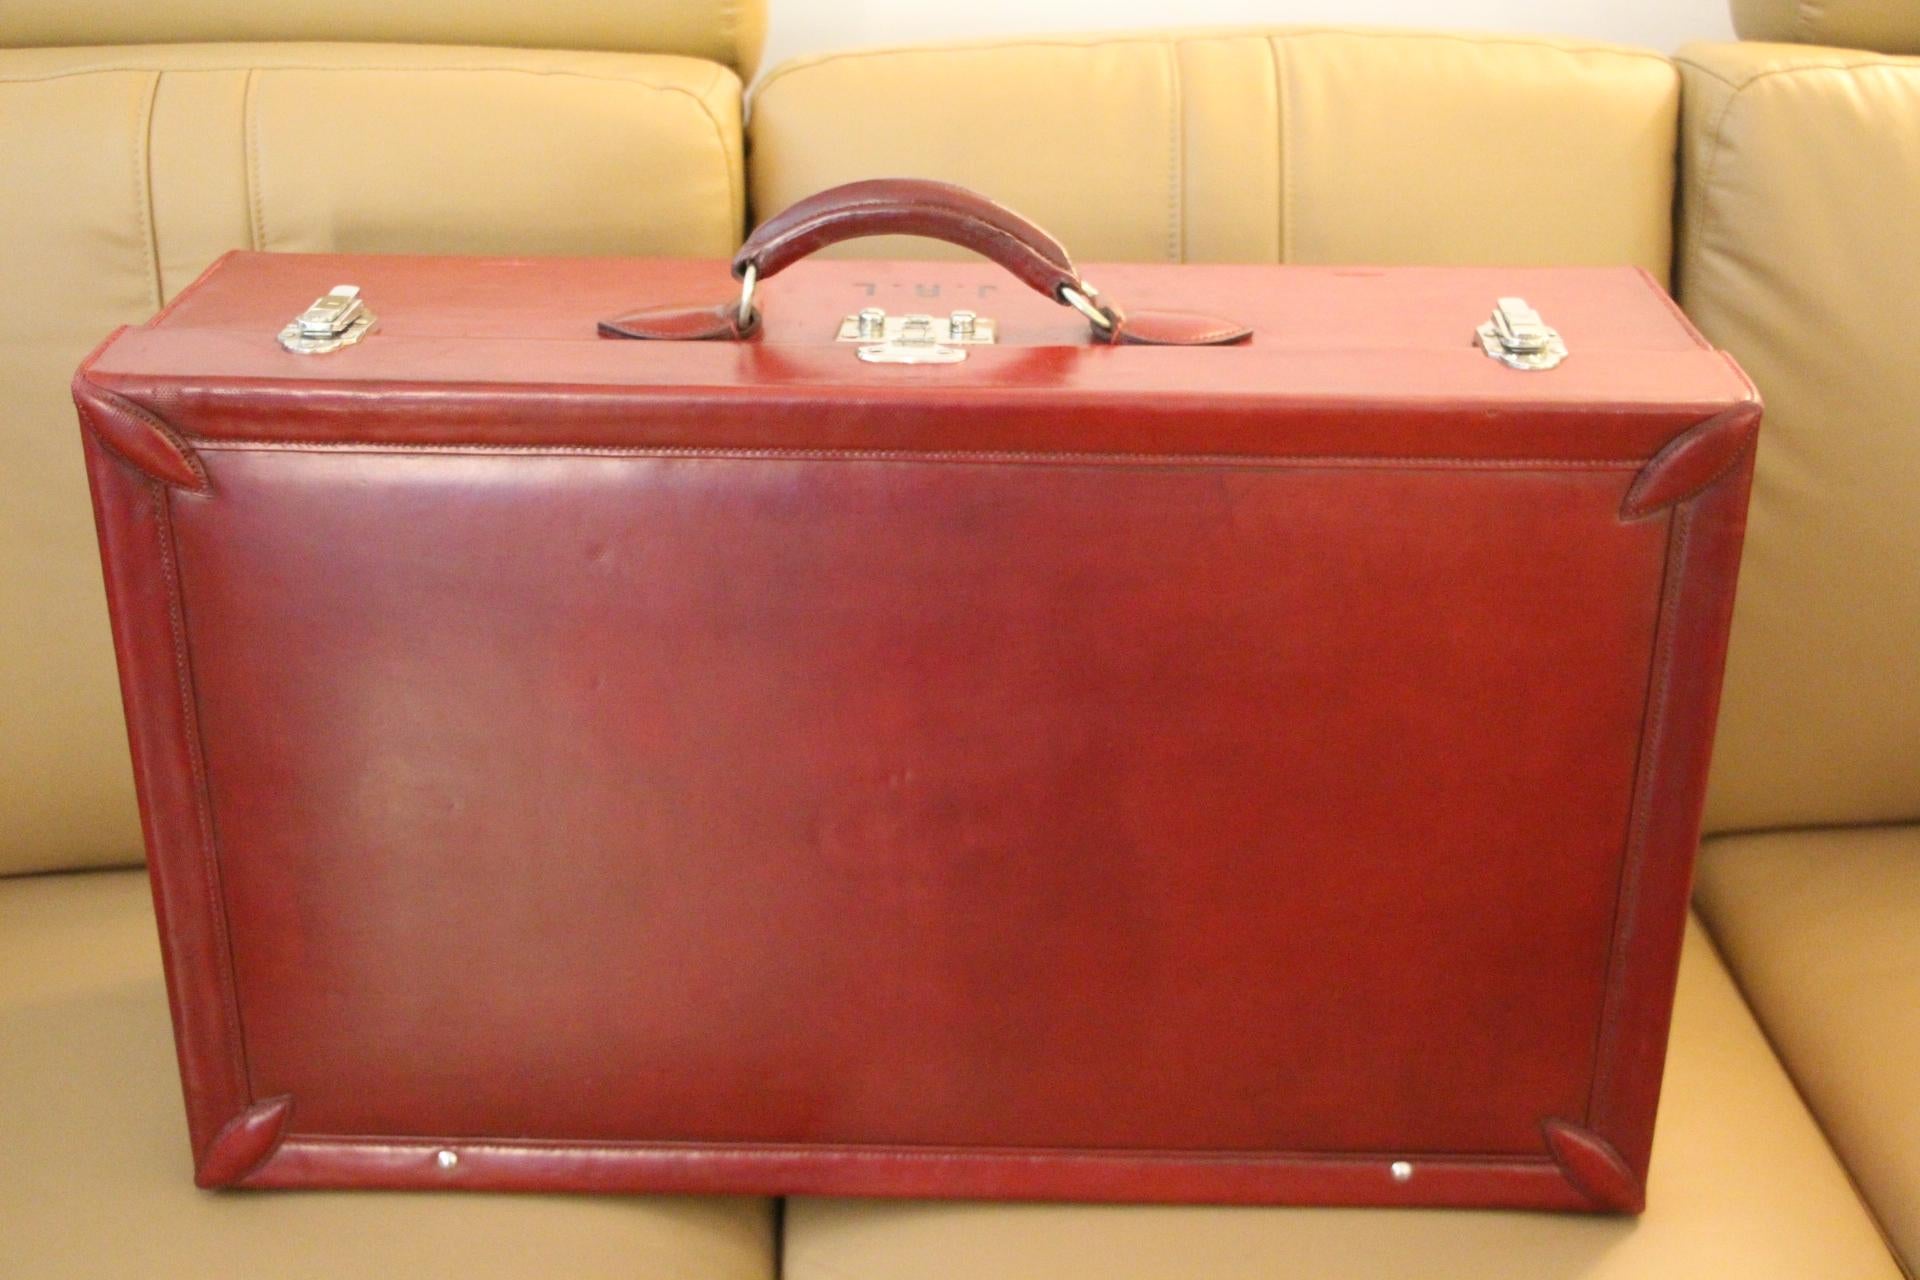 Red Leather Hermes Suitcase 70 cm, Hermes Trunk, Hermes Luggage 2